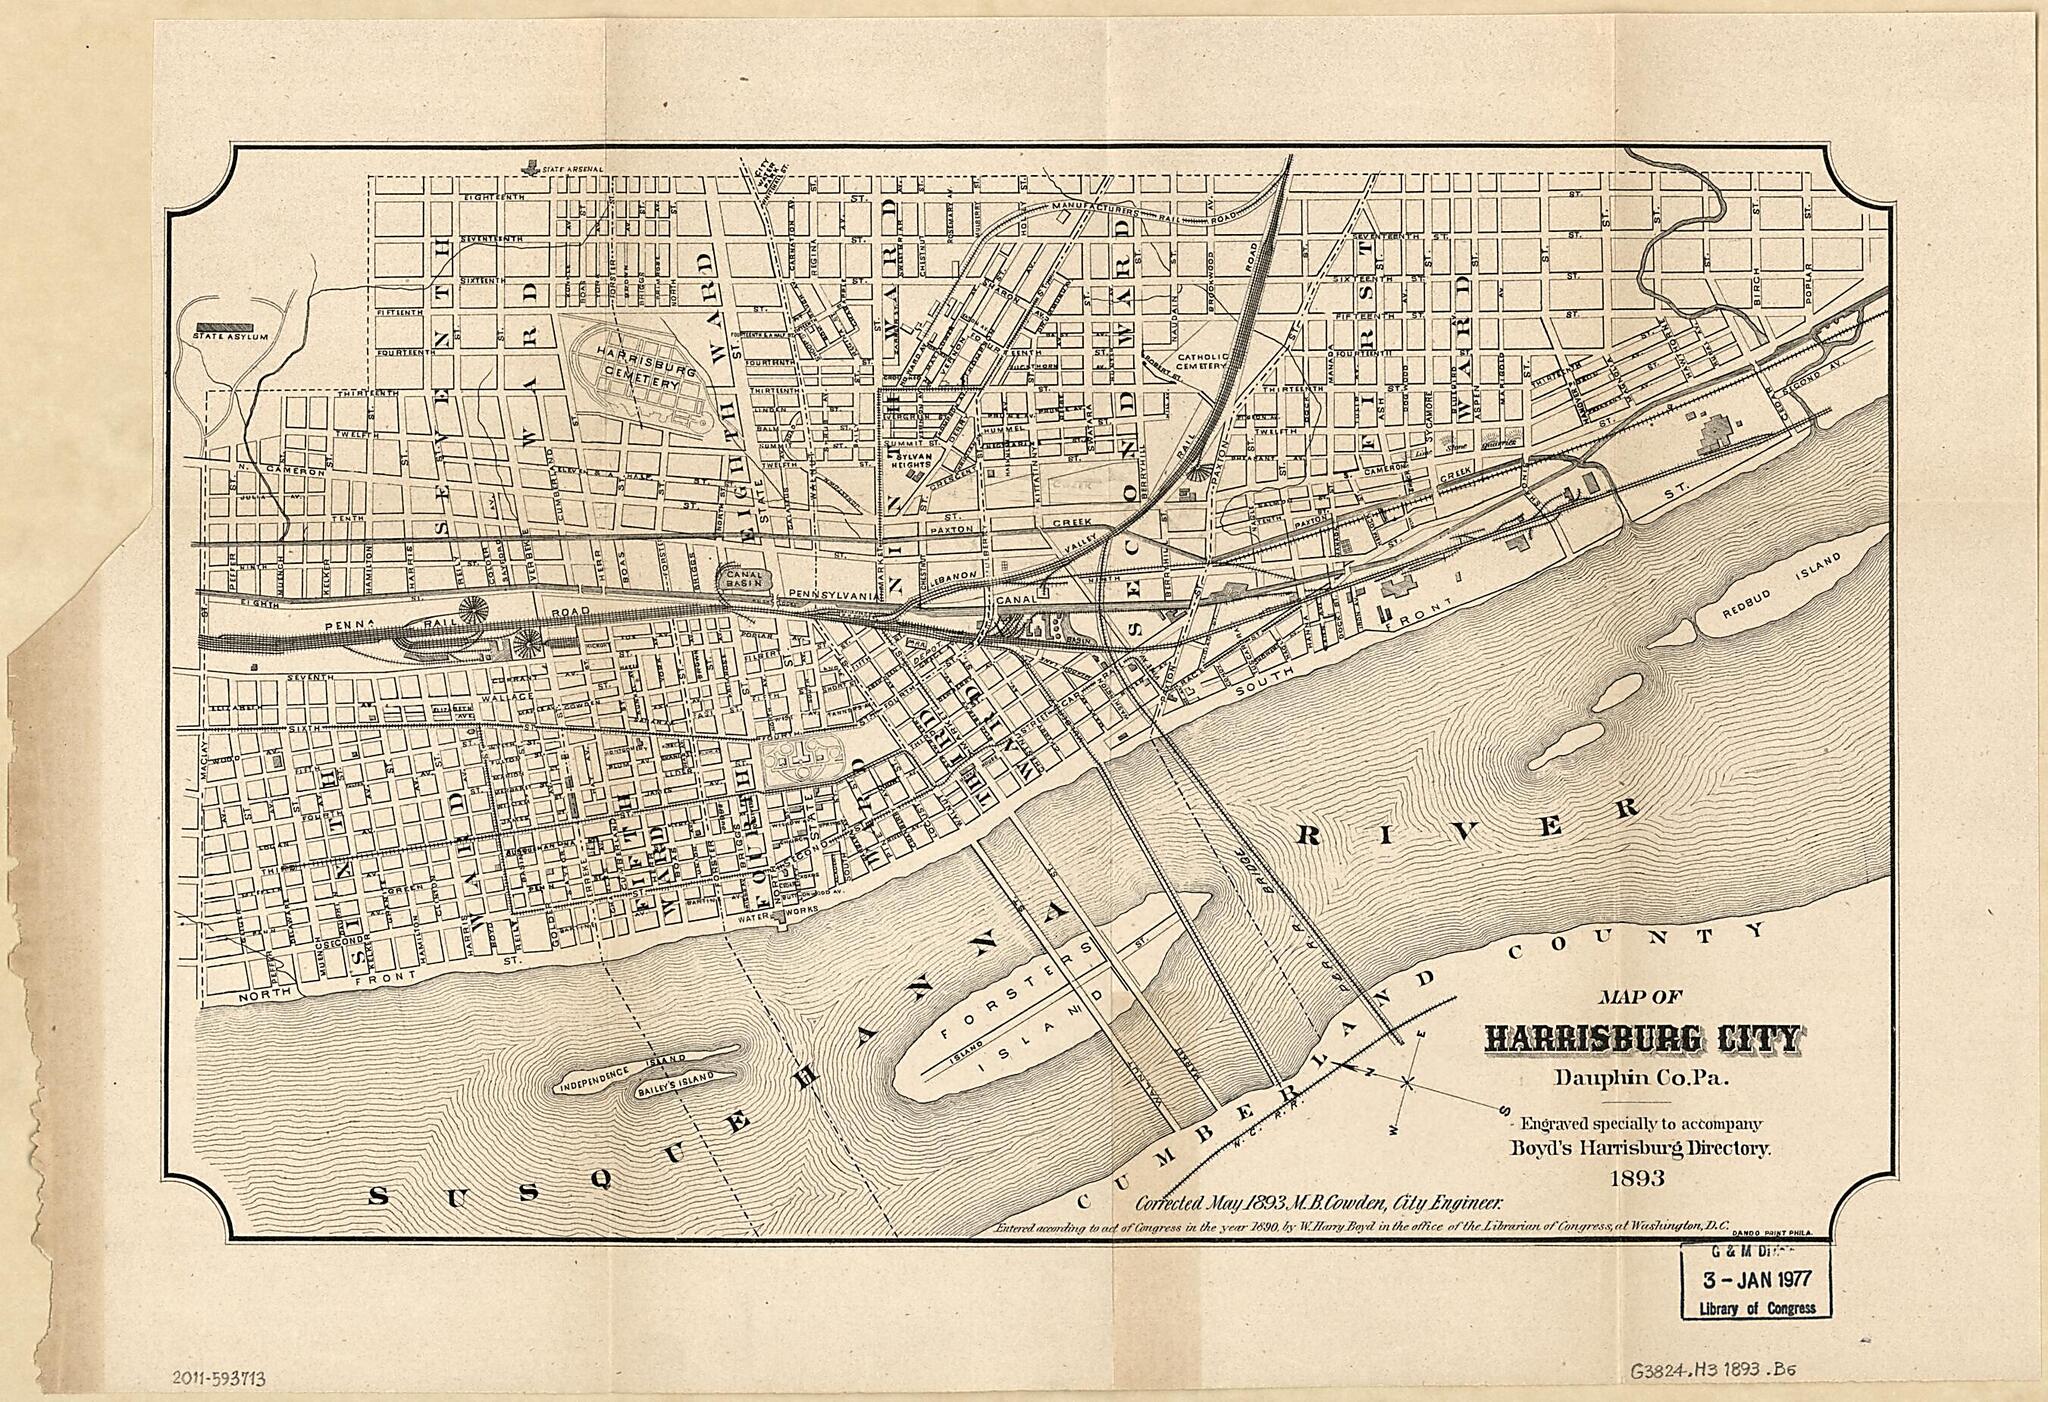 This old map of Map of Harrisburg City, Dauphin County Pennsylvania from 1893 was created by William Henry Boyd, M. B. Cowden,  Harrisburg (Pa.). City Engineer in 1893